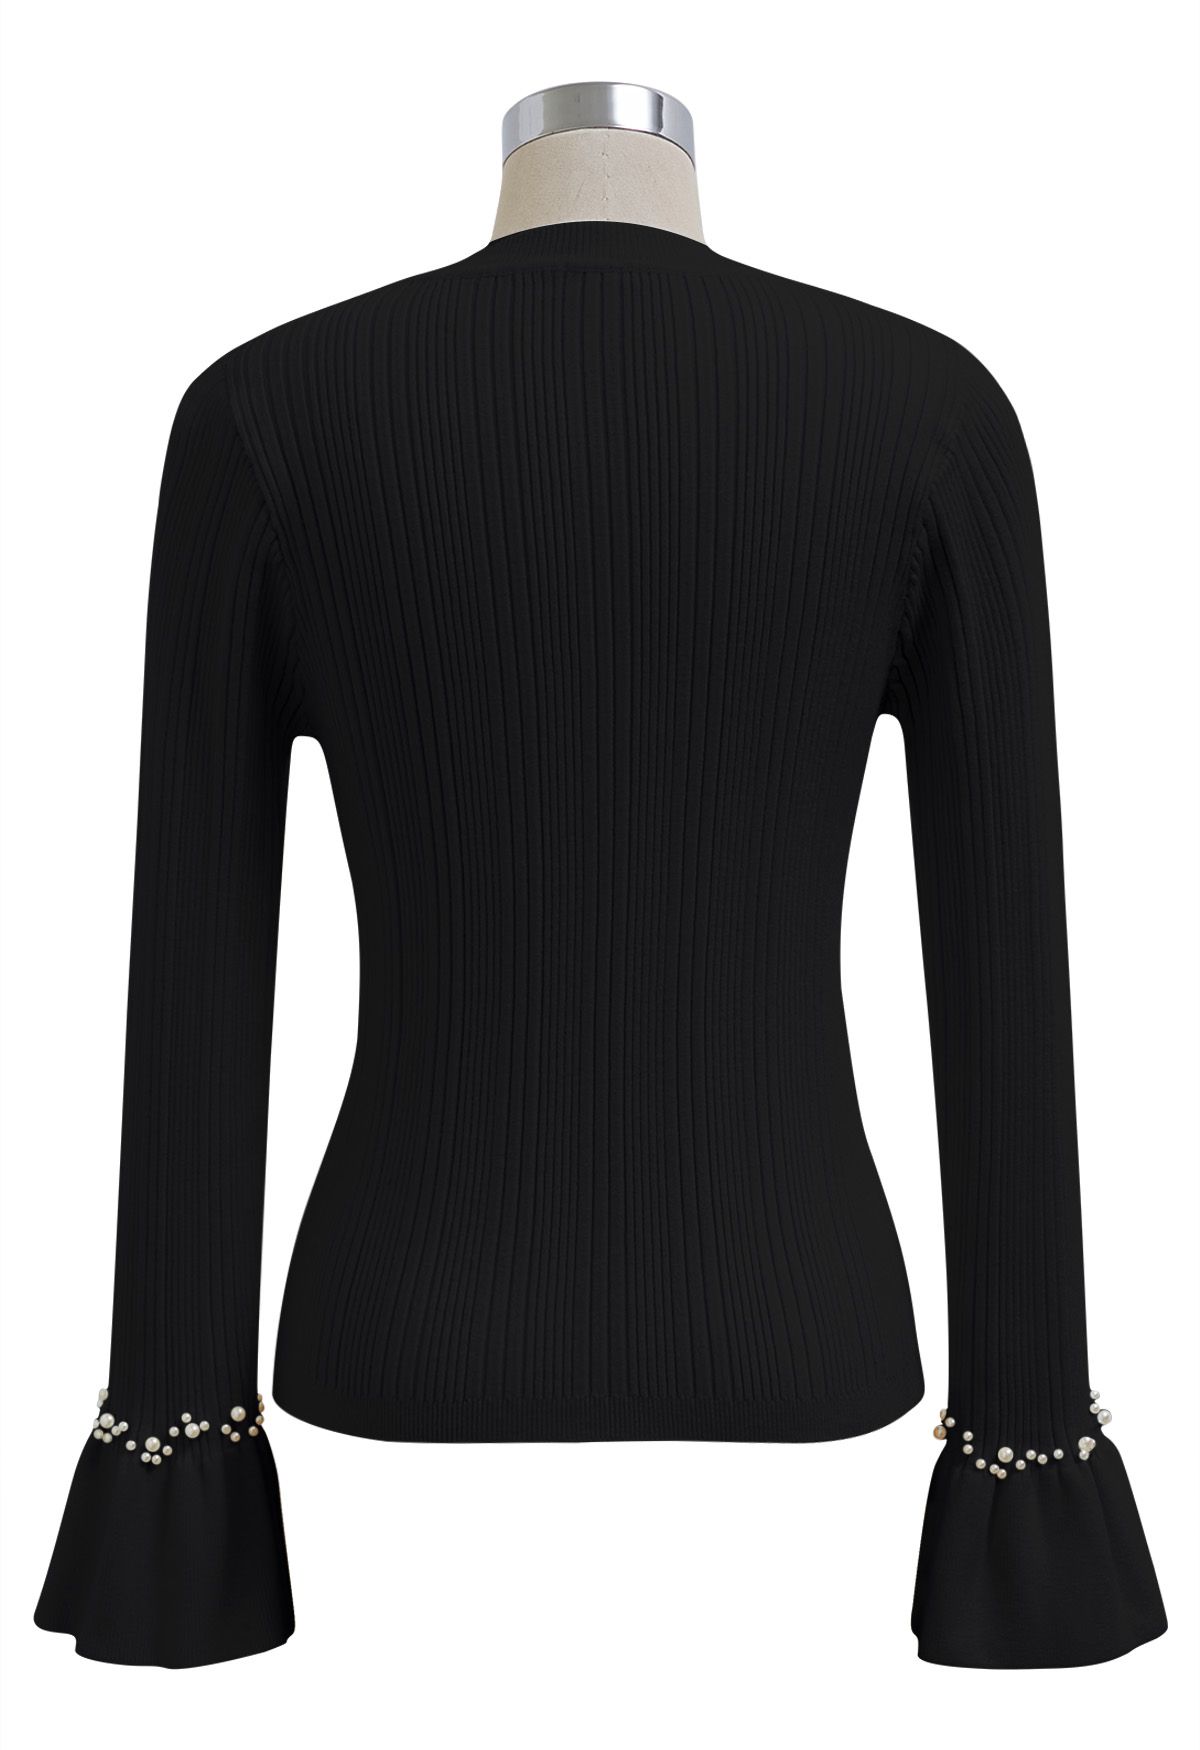 Pearl Adorned Flare Cuffs Ribbed Knit Top in Black